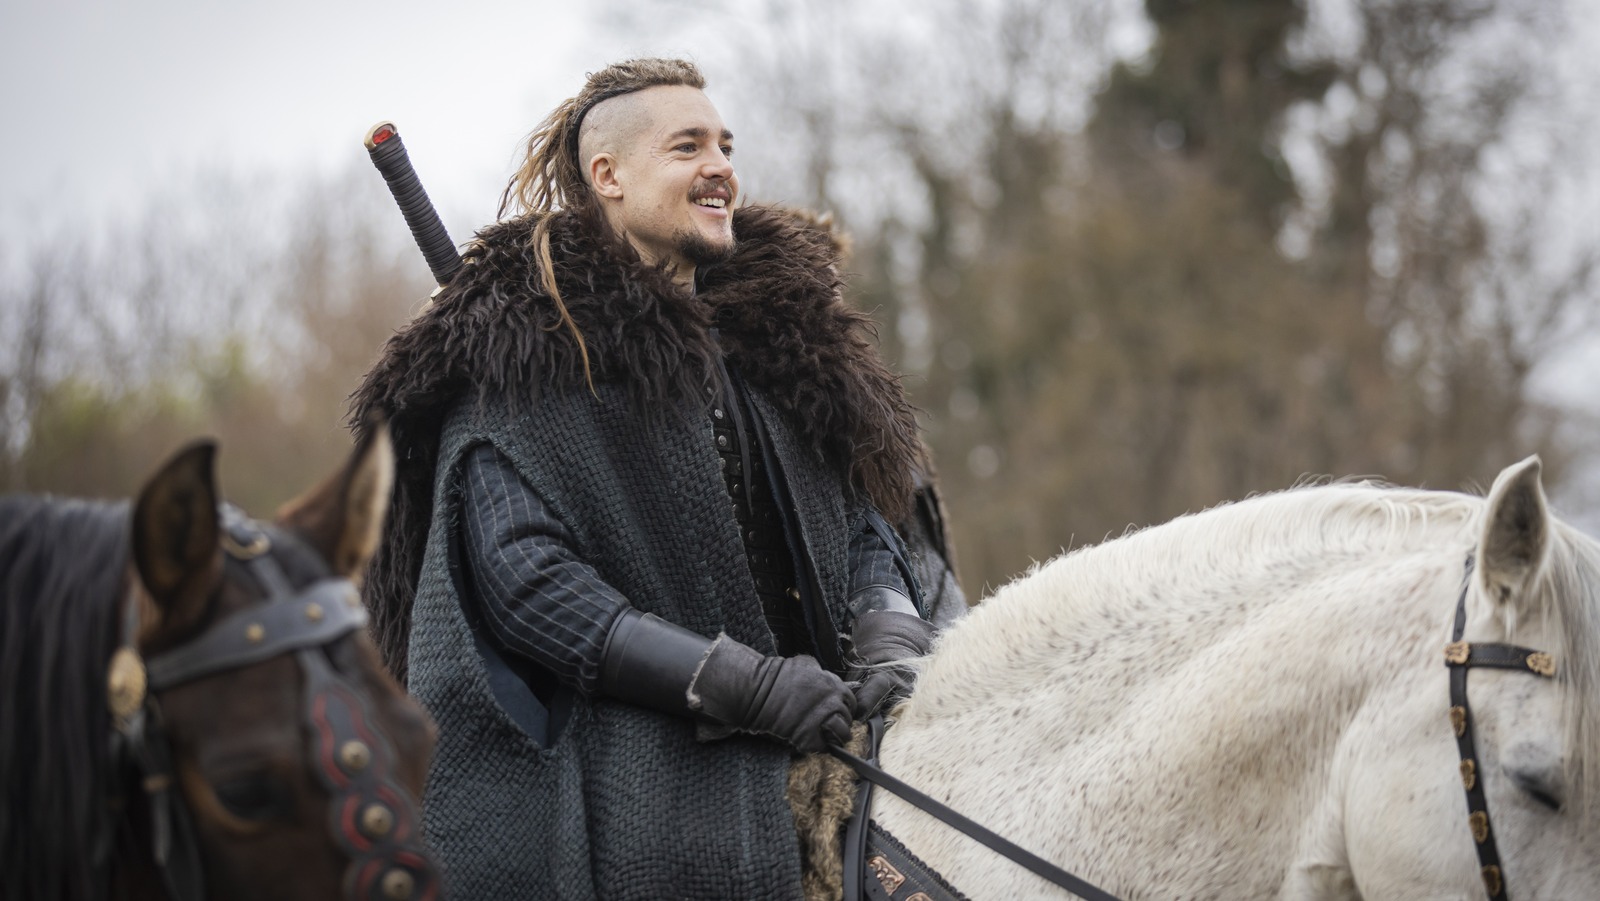 HEART OF ENGLAND — UHTRED ~ over 1000 years ago